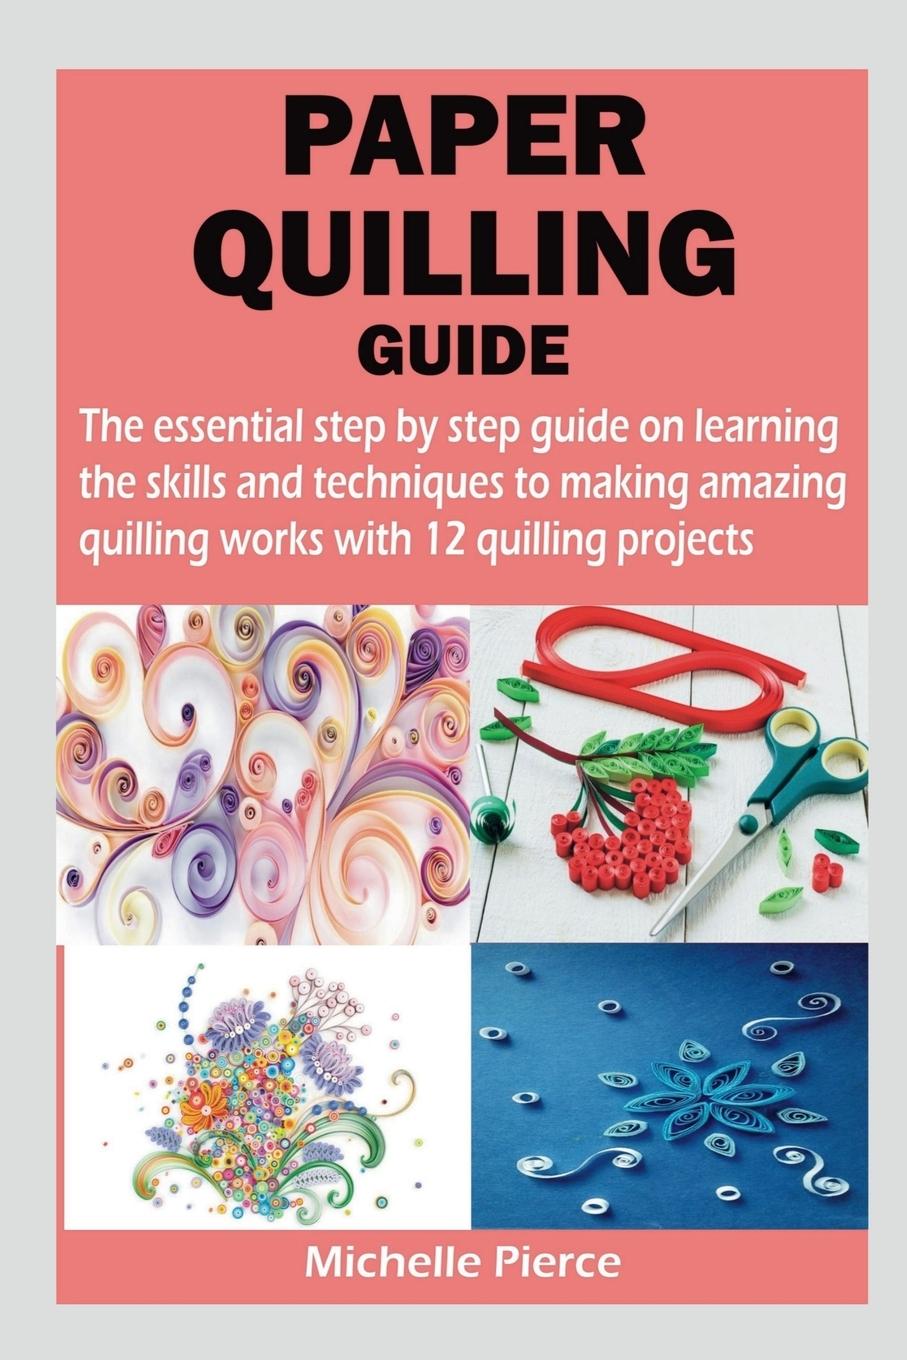 Book PAPER QUILLING GUIDE 